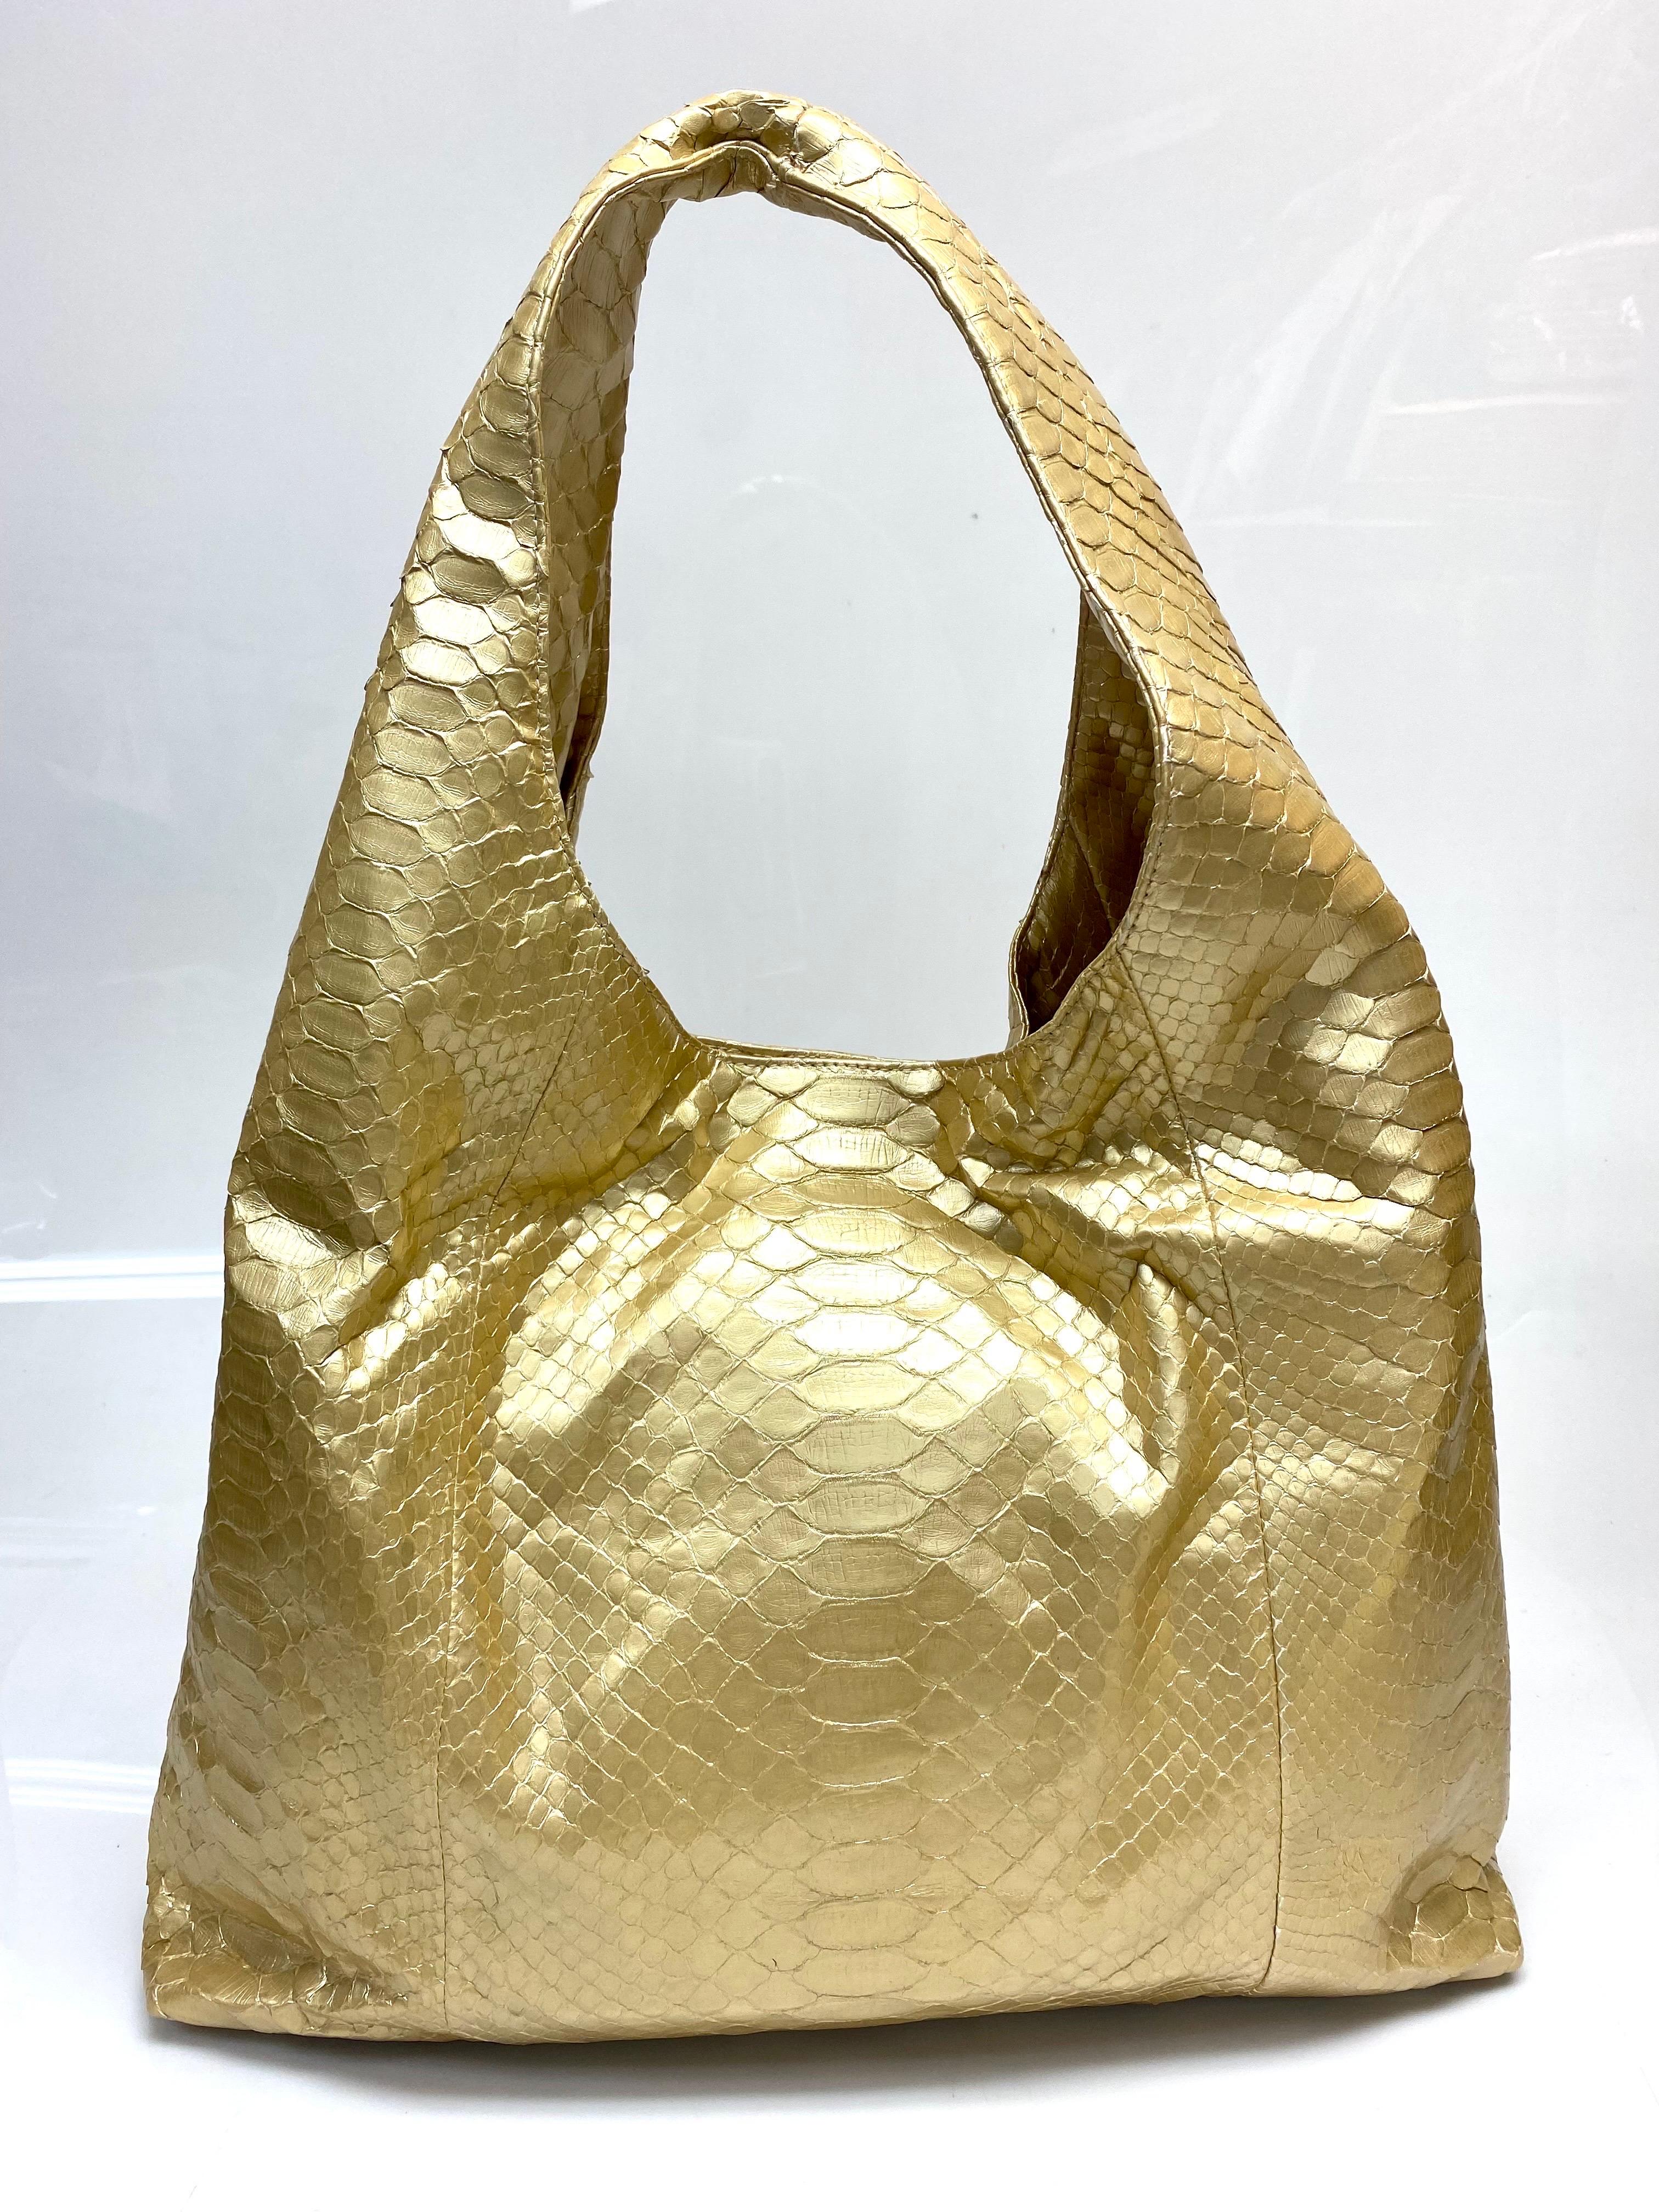 Hunting Season Large Gold Metallic Python Handbag In Good Condition For Sale In West Palm Beach, FL